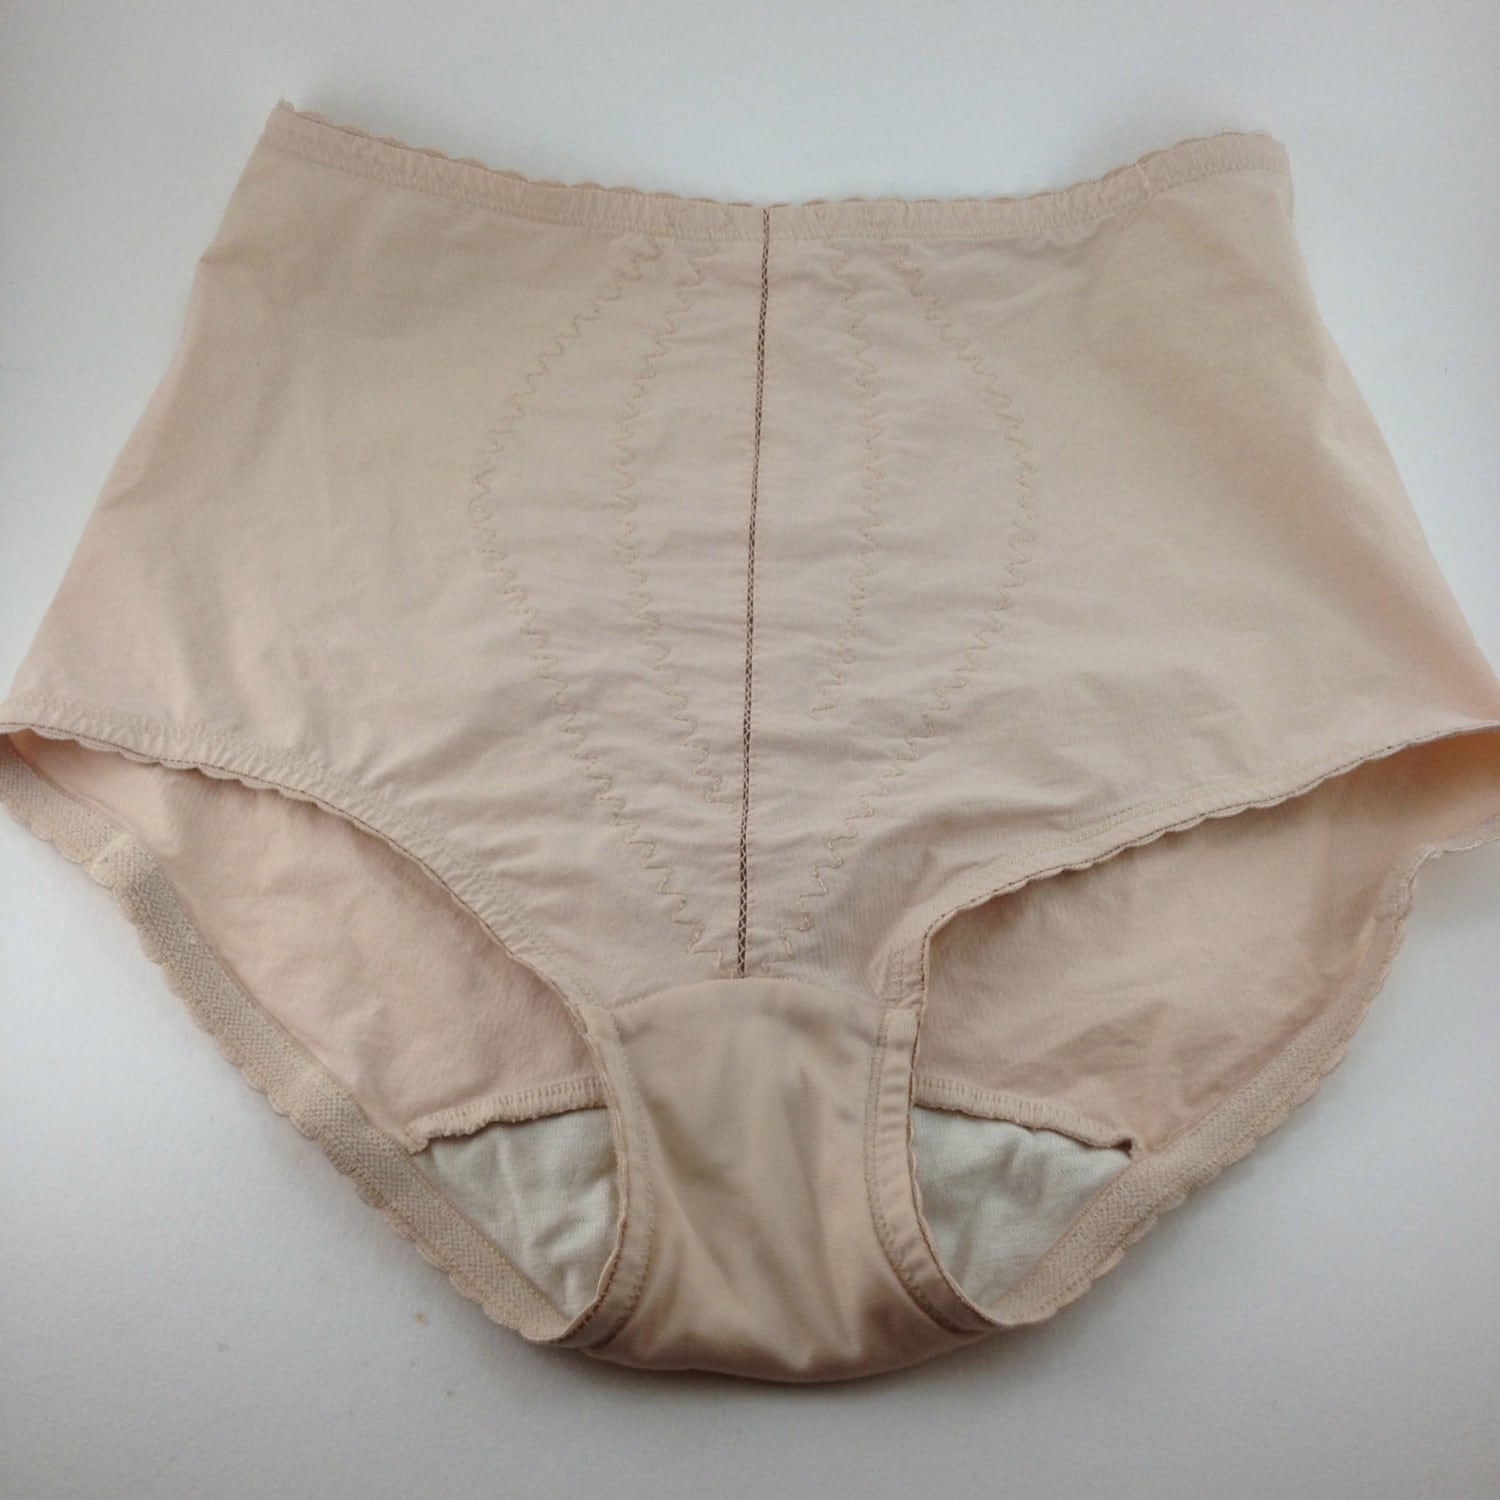 high waist Panties granny underwear fetish wear pin up clothes